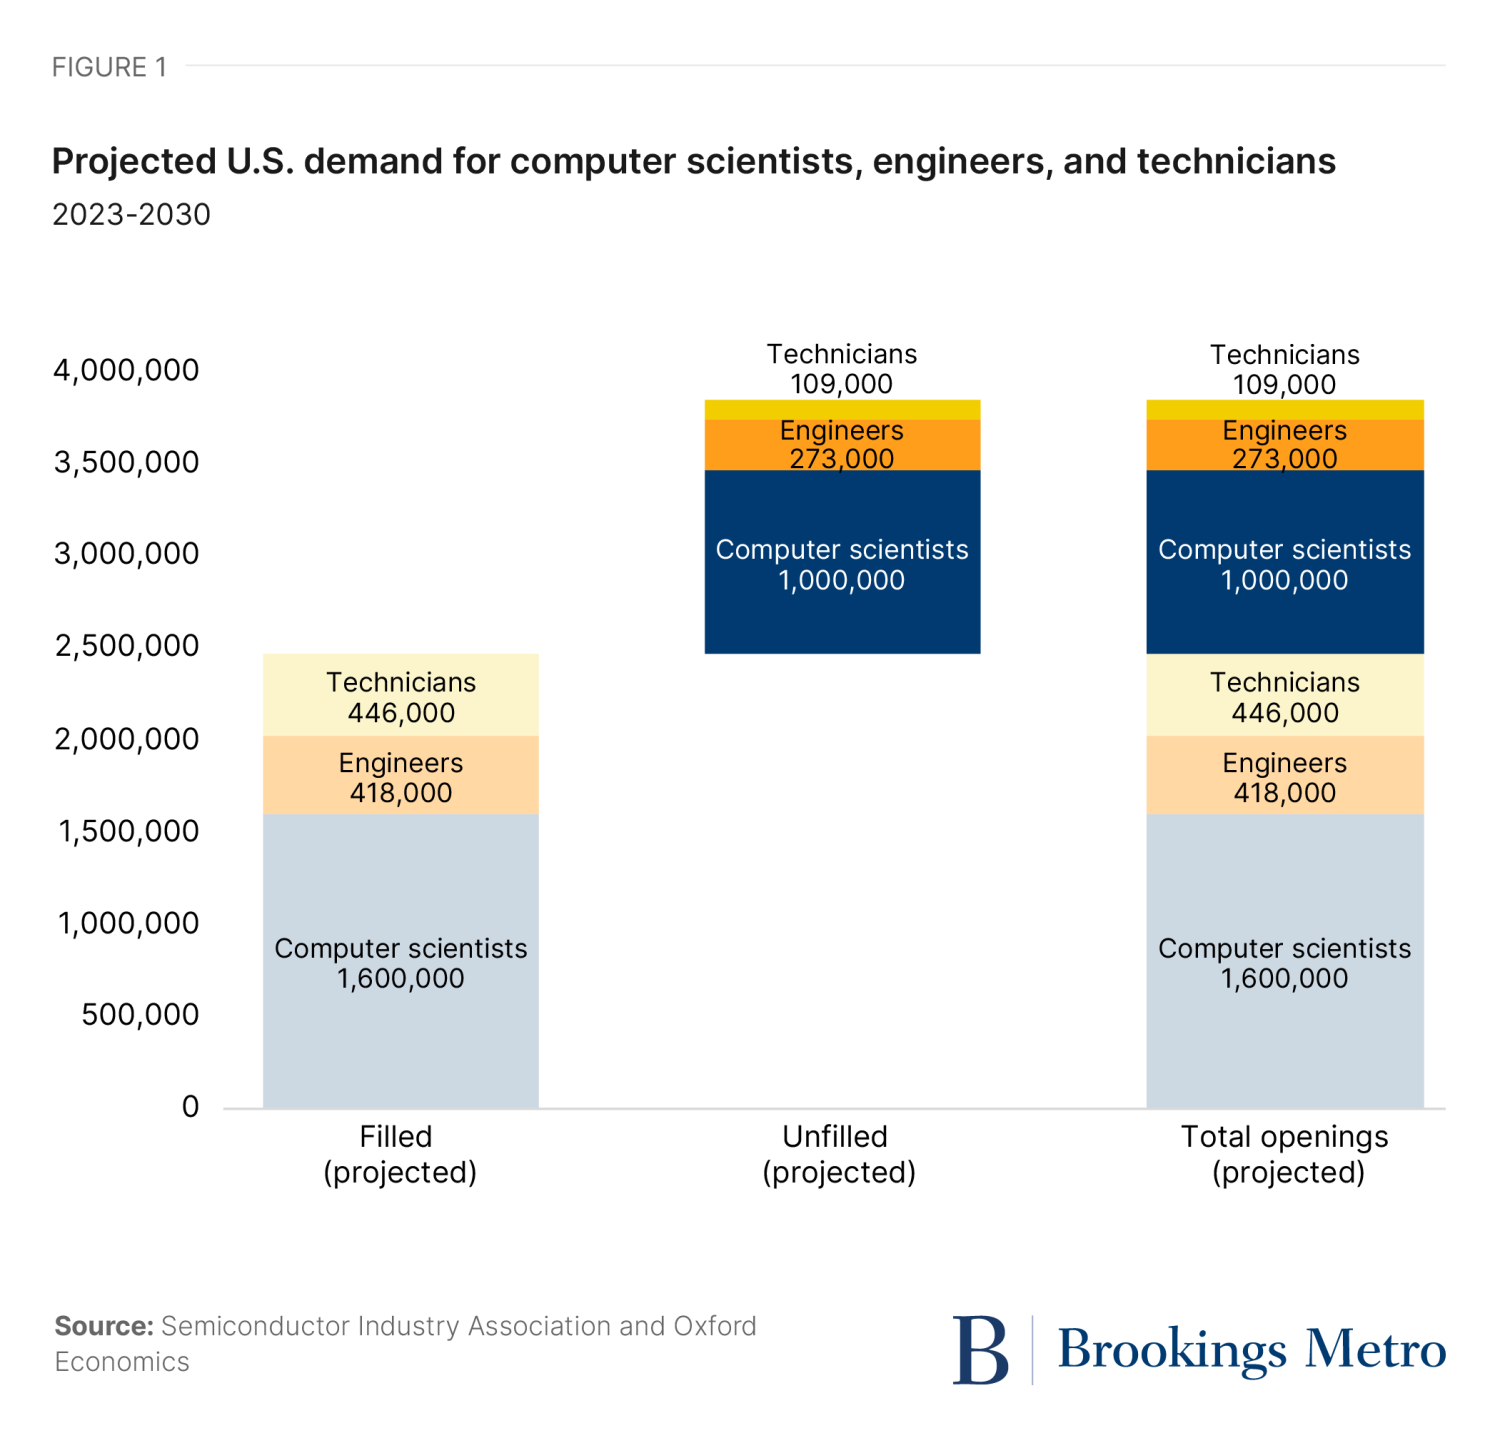 Figure 1. Projected U.S. demand for computer scientists, engineers, and technicians